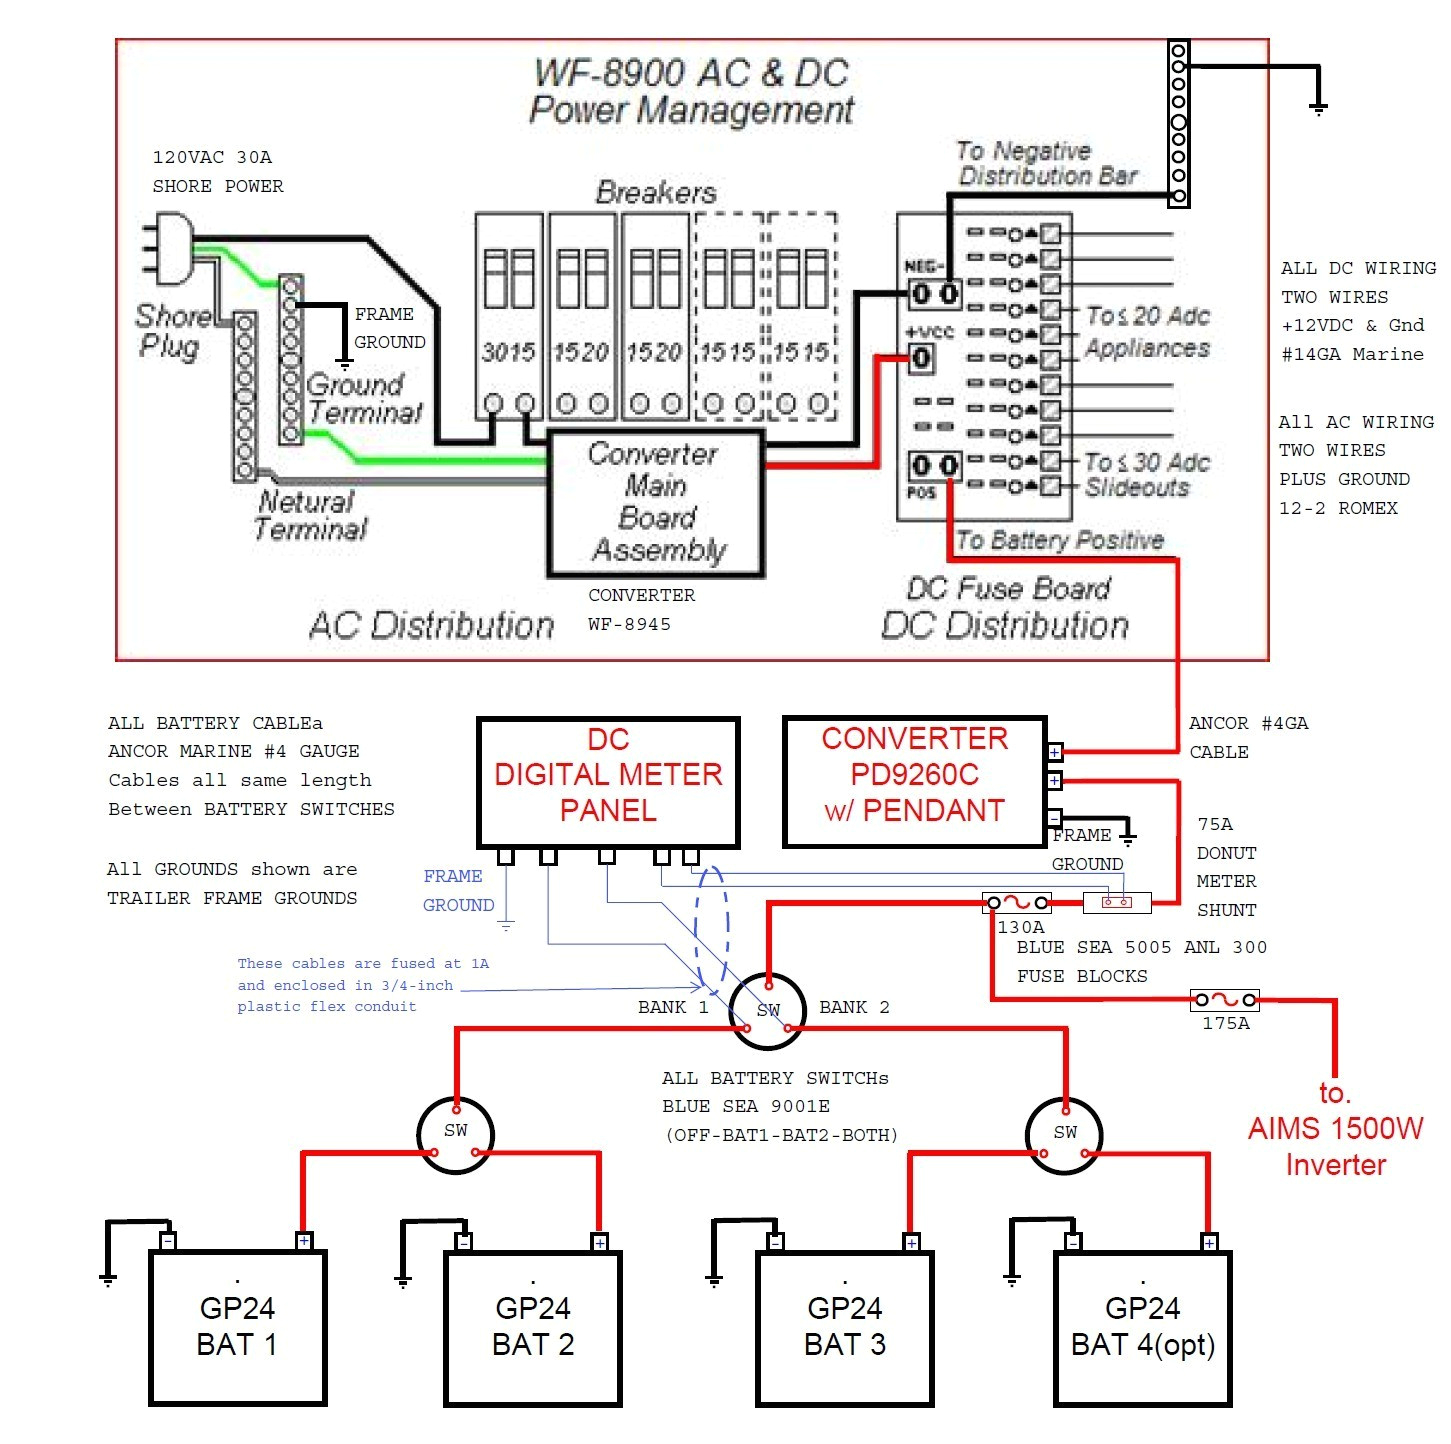 battery wiring diagram unique wiring diagram switch outlet valid wiring diagram rv plug fresh pics of battery wiring diagram jpg